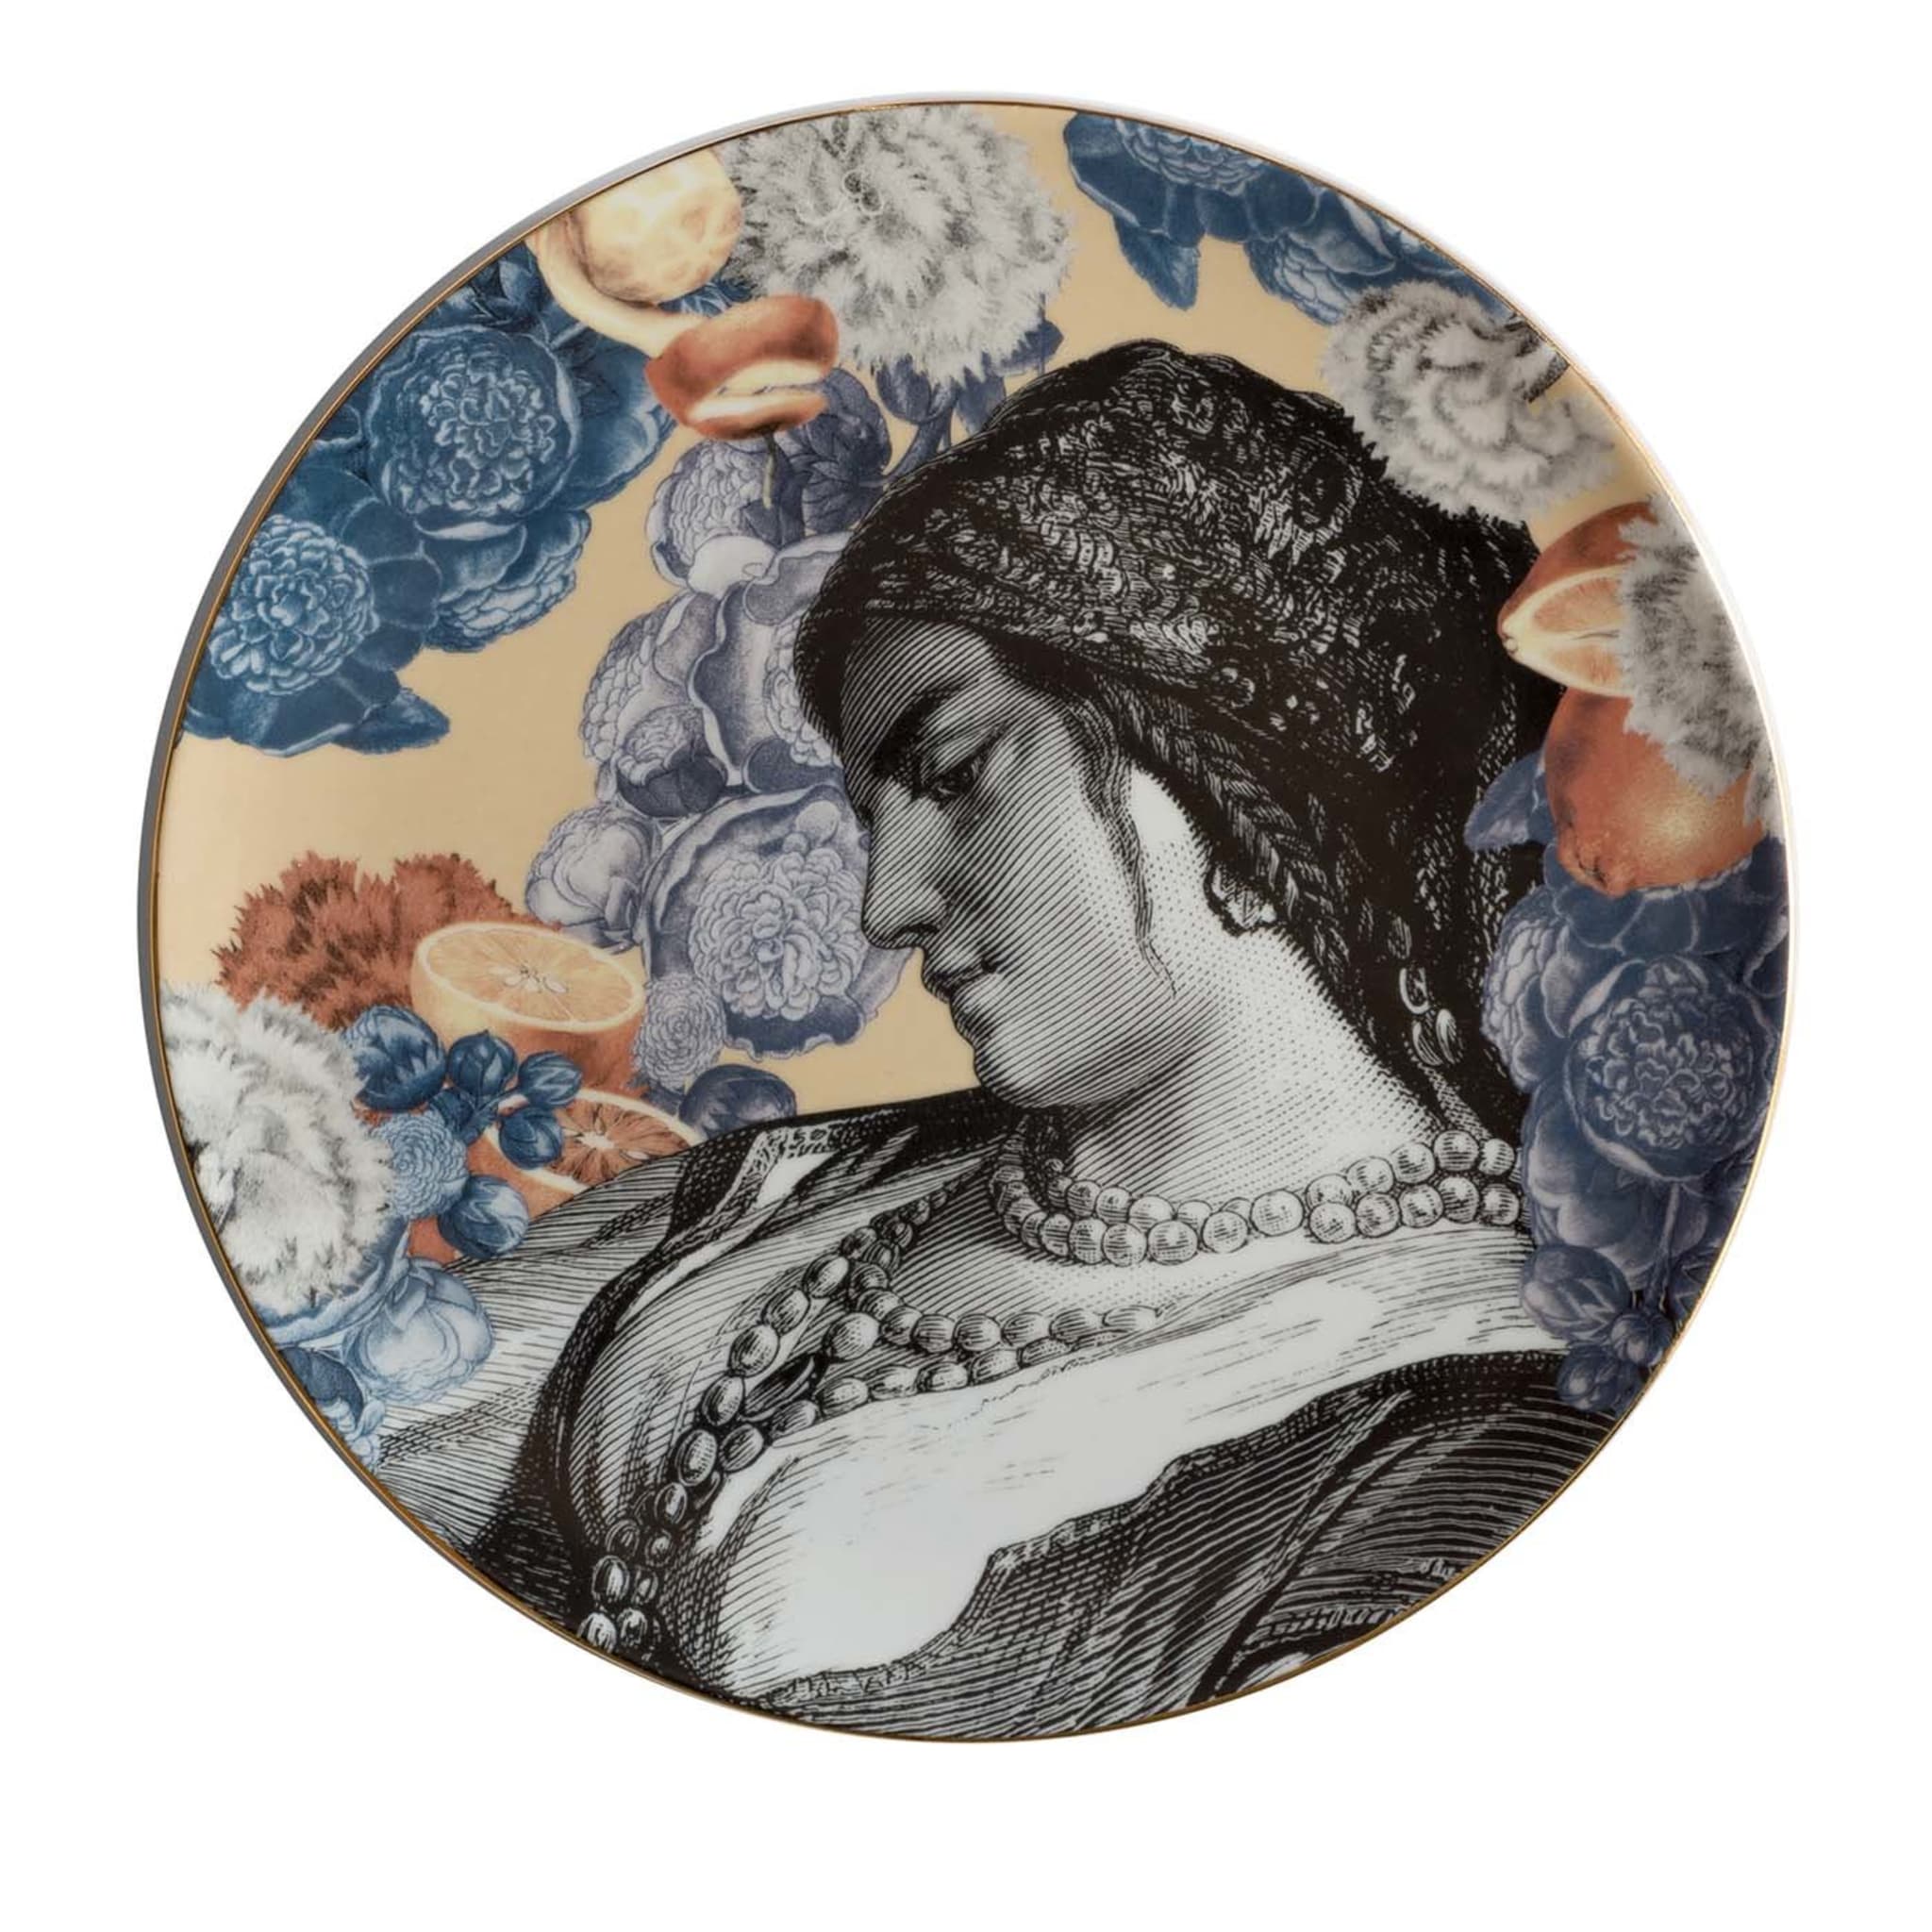 Cairo Porcelain Dinner Plate With A Woman'S Face And Flowers #2 - Main view